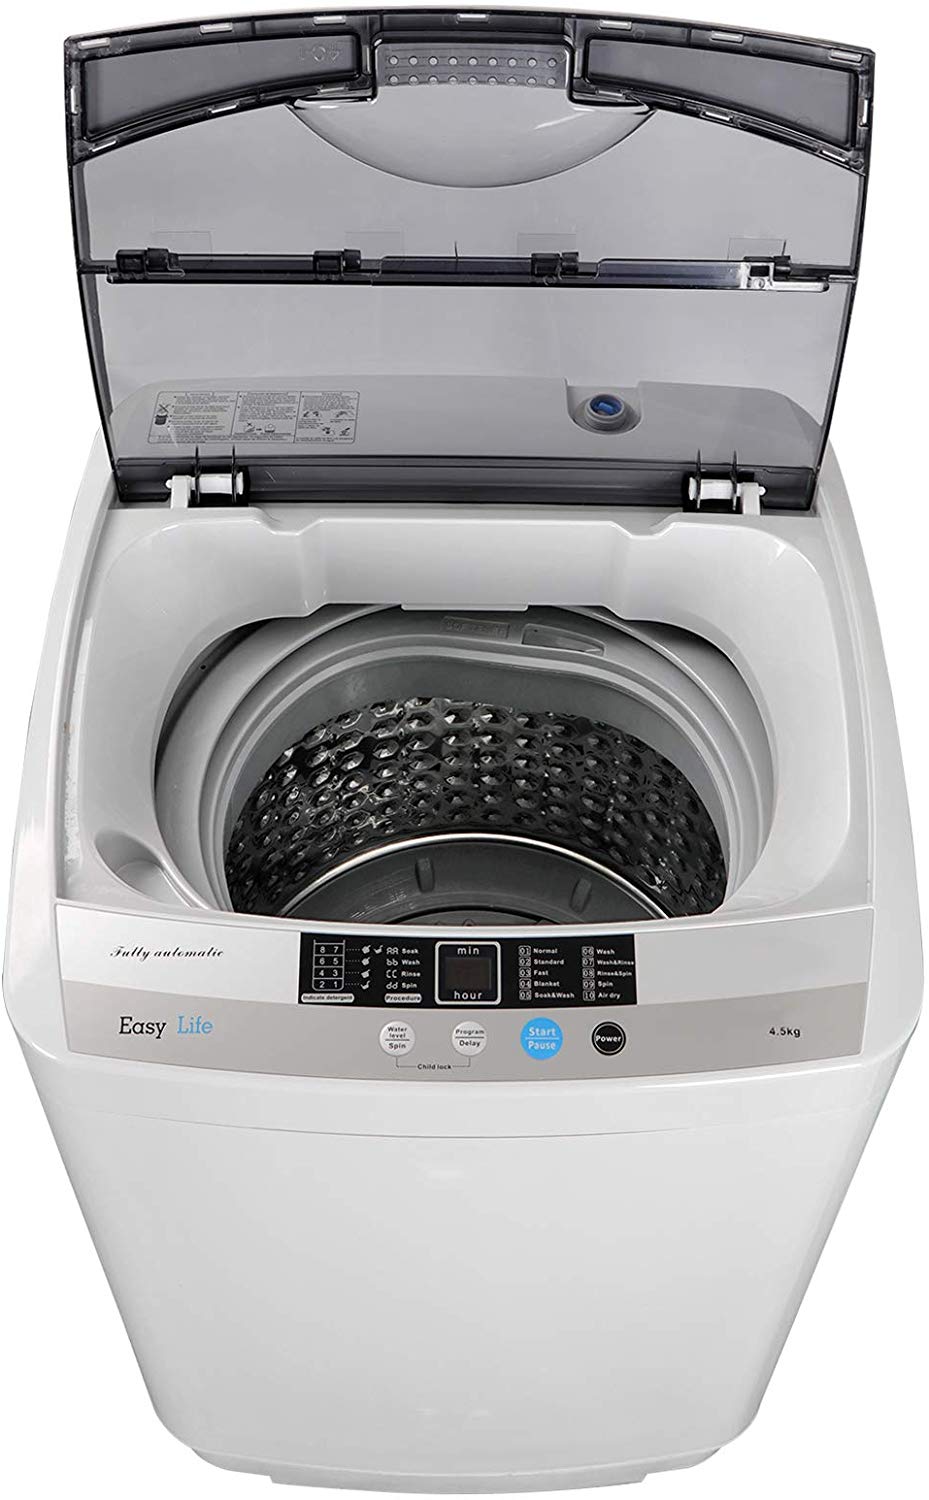 The 10 Best Small Washers and Dryers of 2020